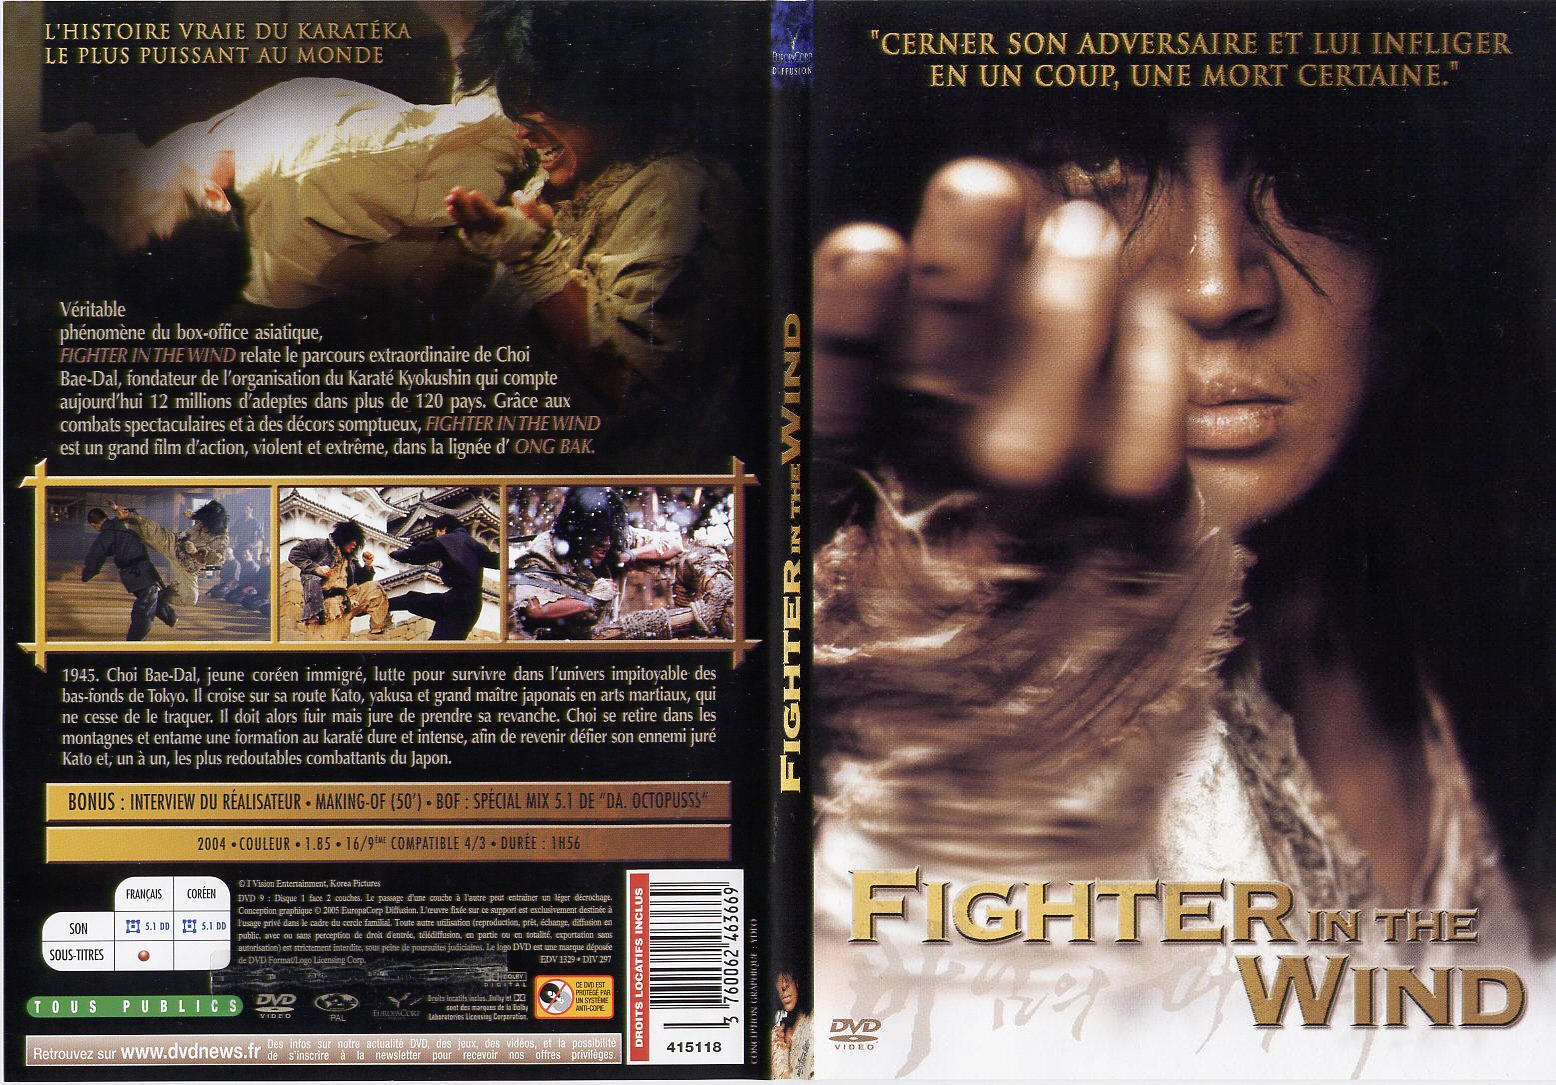 Jaquette DVD Fighter in the wind - SLIM